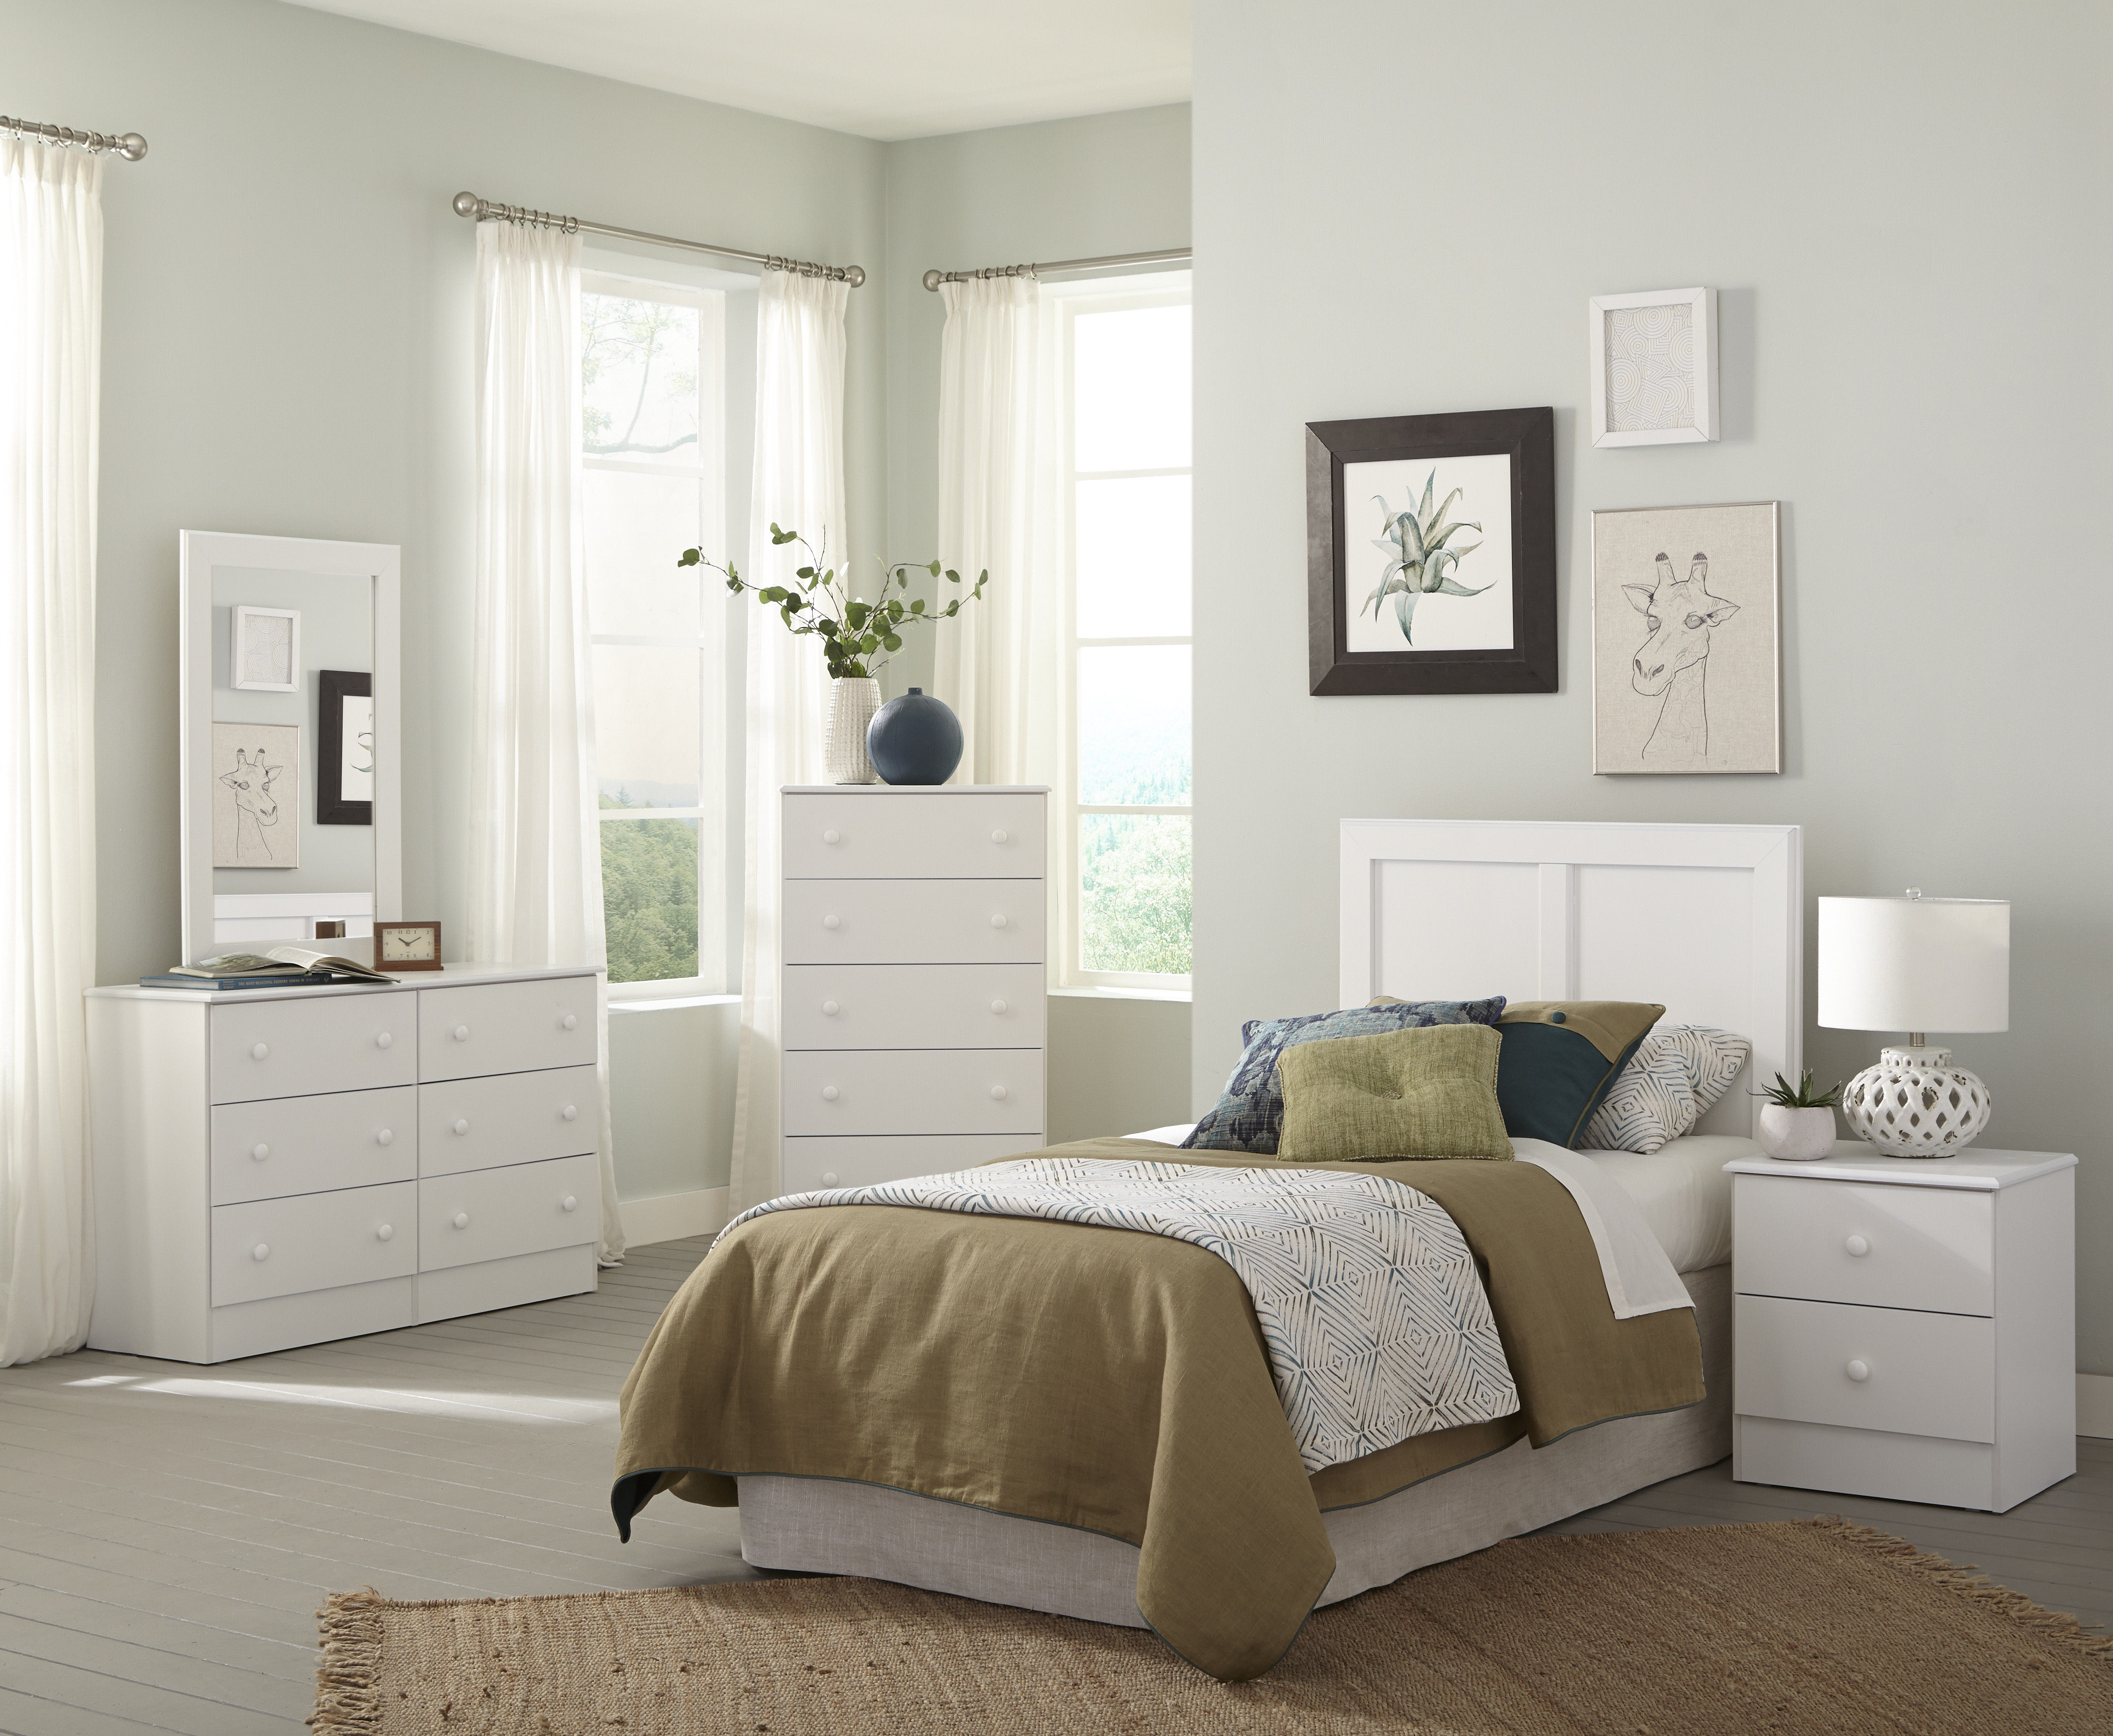 American Furniture Classics Classic White Collection 193K5T Five Piece White Bedroom set including Twin Headboard, Five Drawer Chest, Six Drawer Dresser, Mirror, and Night Stand. - image 1 of 8